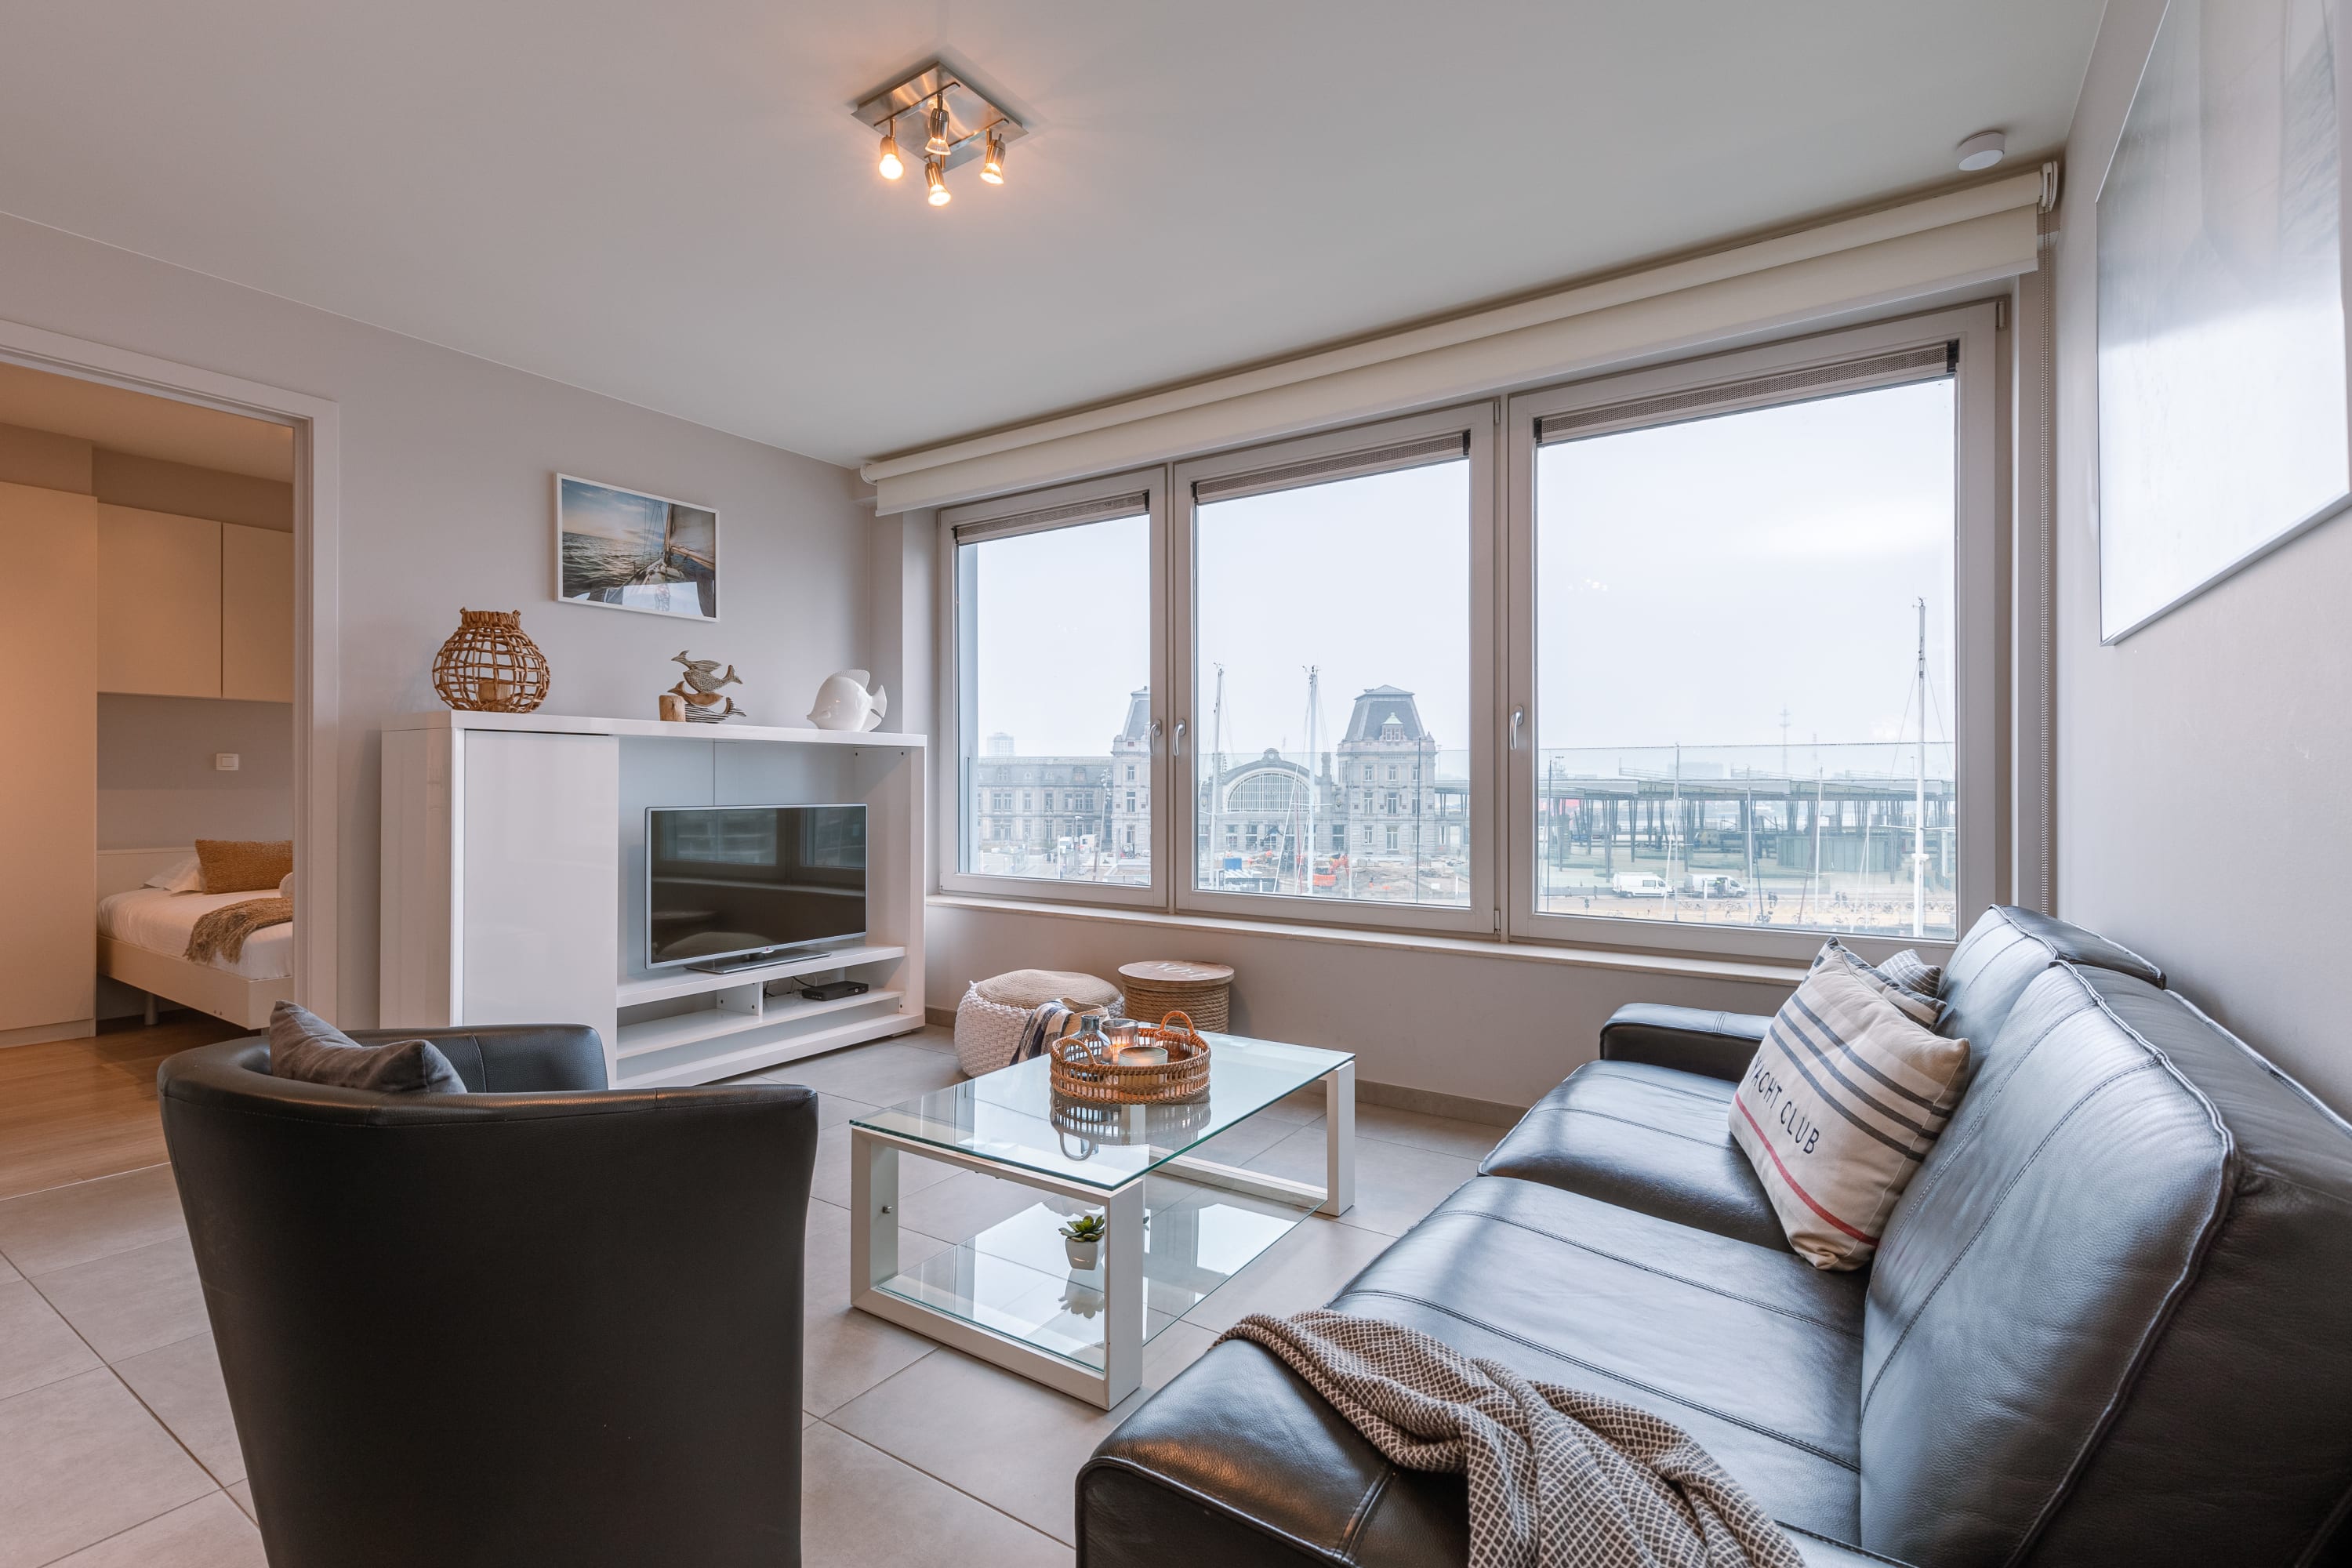 Property Image 2 - Zeilboot - Modern, perfectly appointed apartment with magnificent view over the Port of Ostend